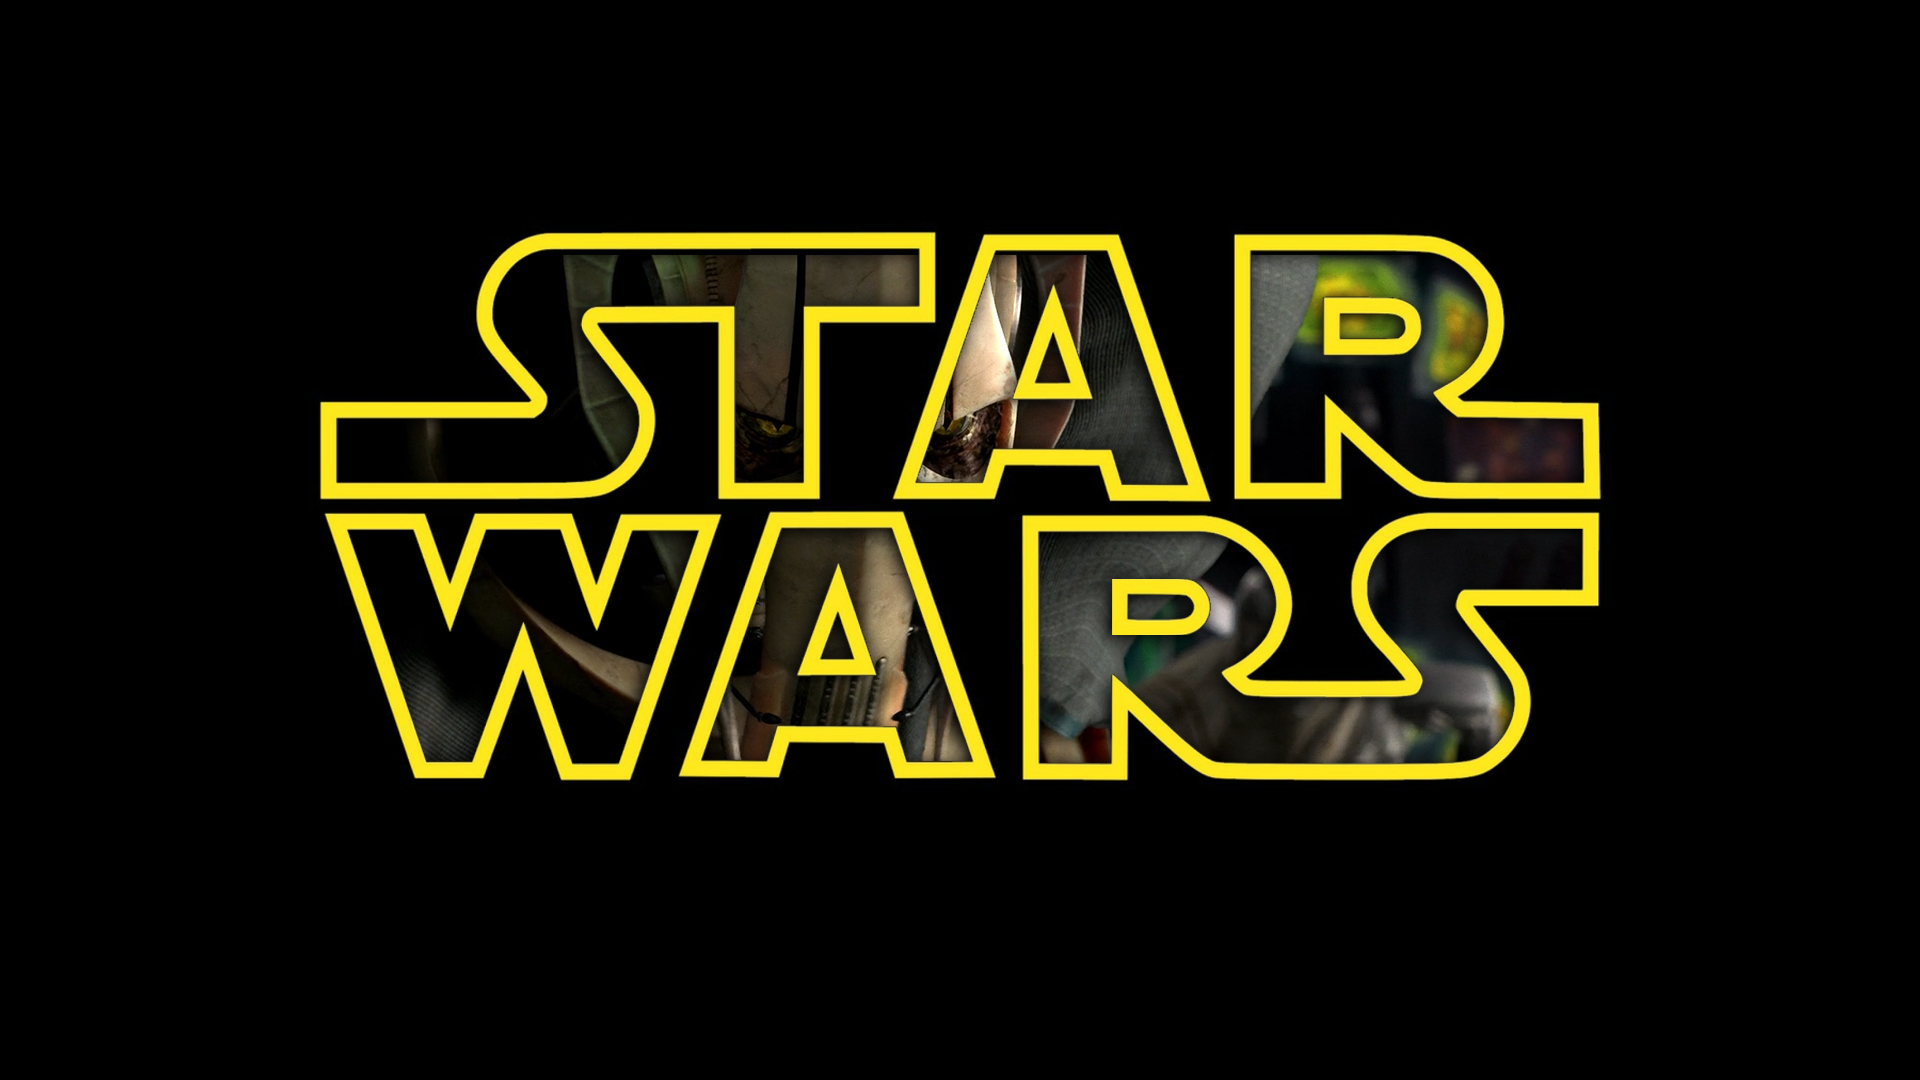 General 1920x1080 General Grievous Star Wars Villains simple background Star Wars: Episode III - The Revenge of the Sith yellow Star Wars movies science fiction